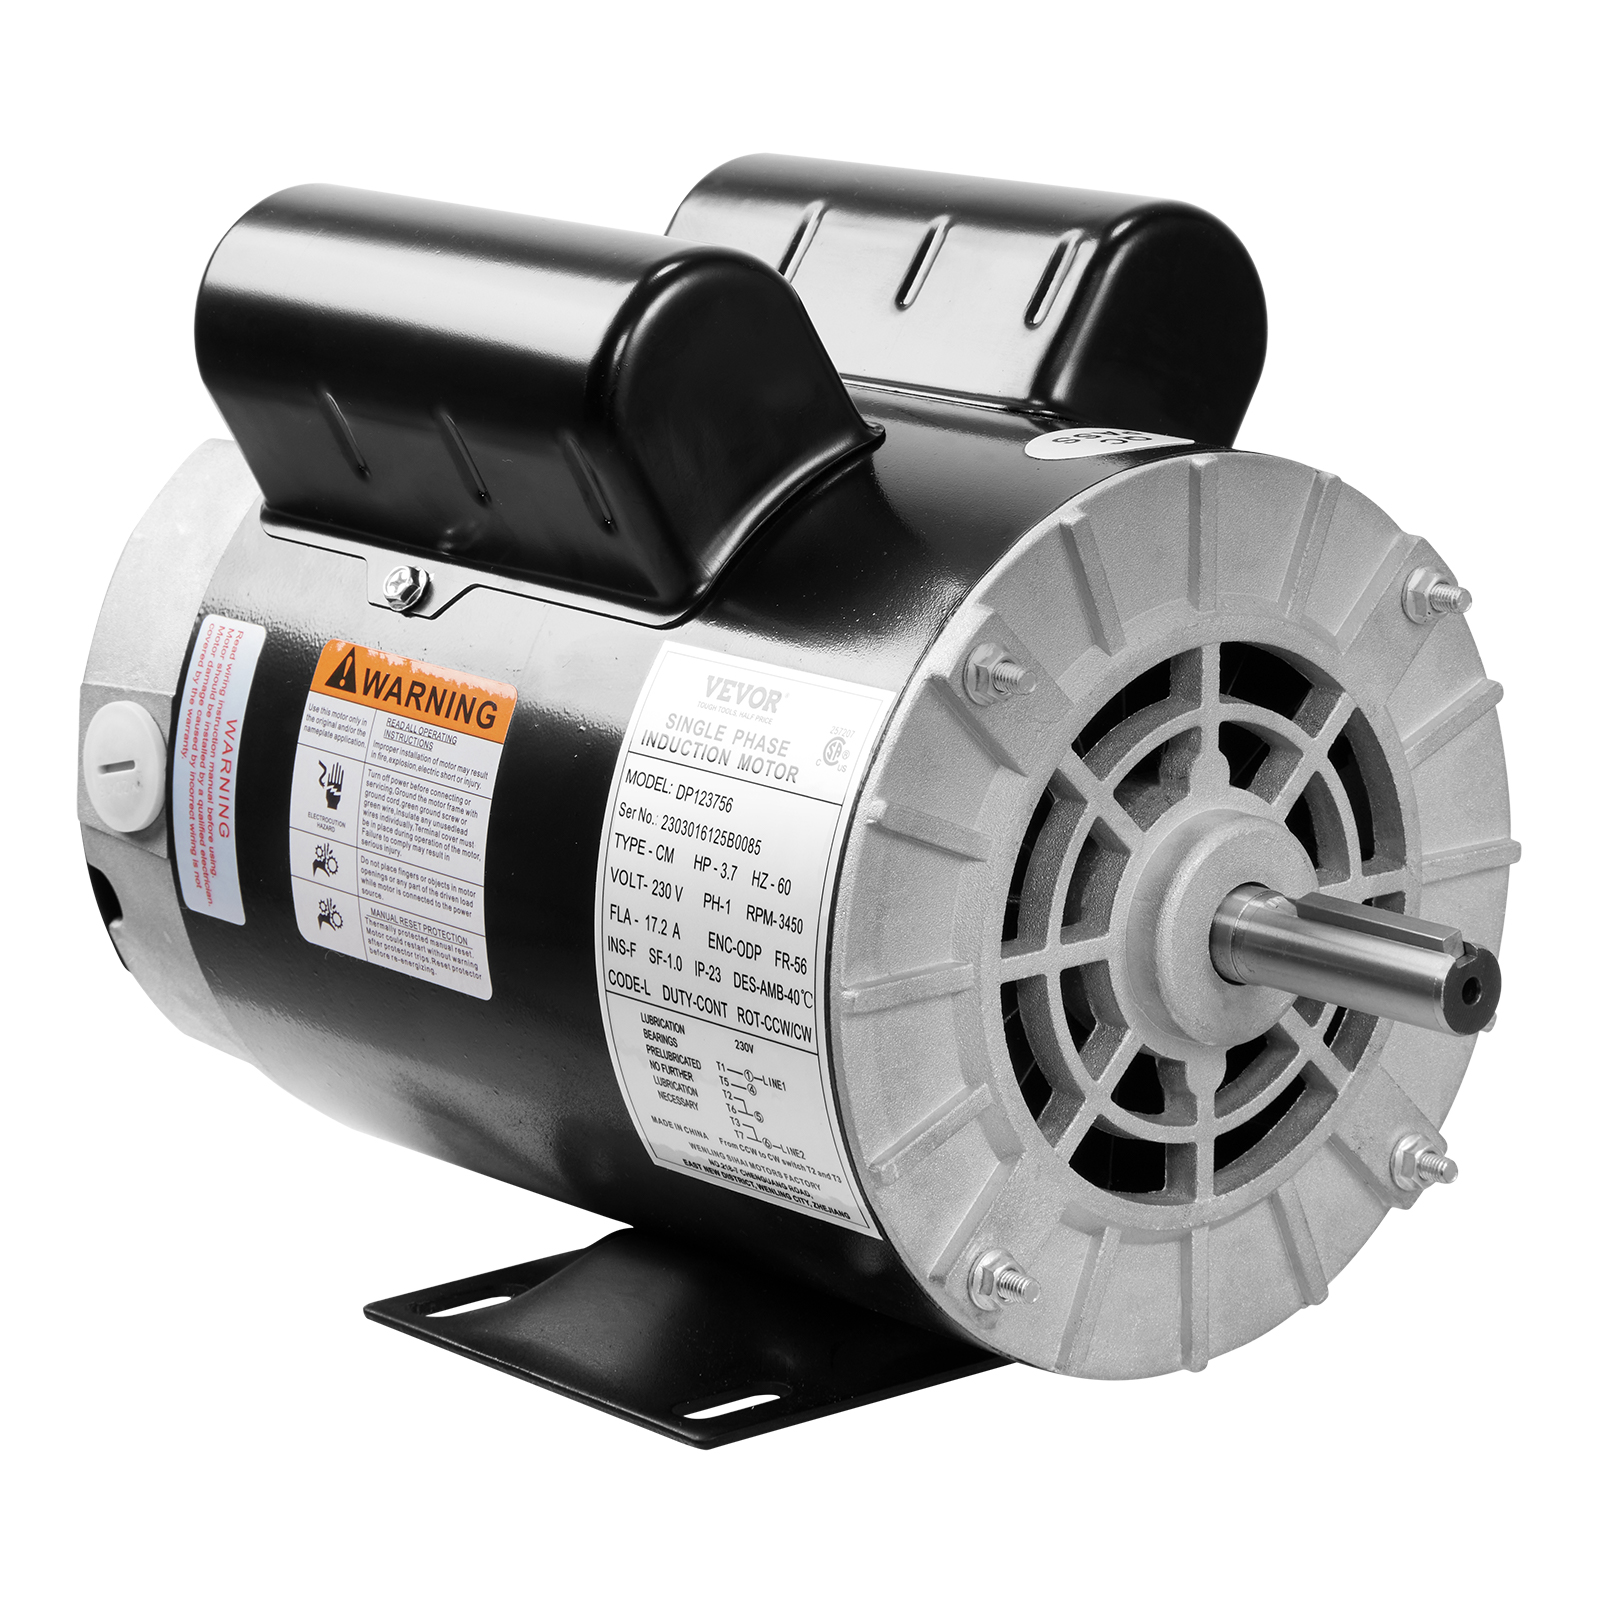 BENTISM 3.7HP Air Compressor Electric Motor, 230V 17.2Amps, 56 Frame 3450RPM, 5/8" Keyed Shaft, CW/CCW Rotation, 1.88" Shaft Length for Air Compressors Has Obtained CSA Certification - image 1 of 9